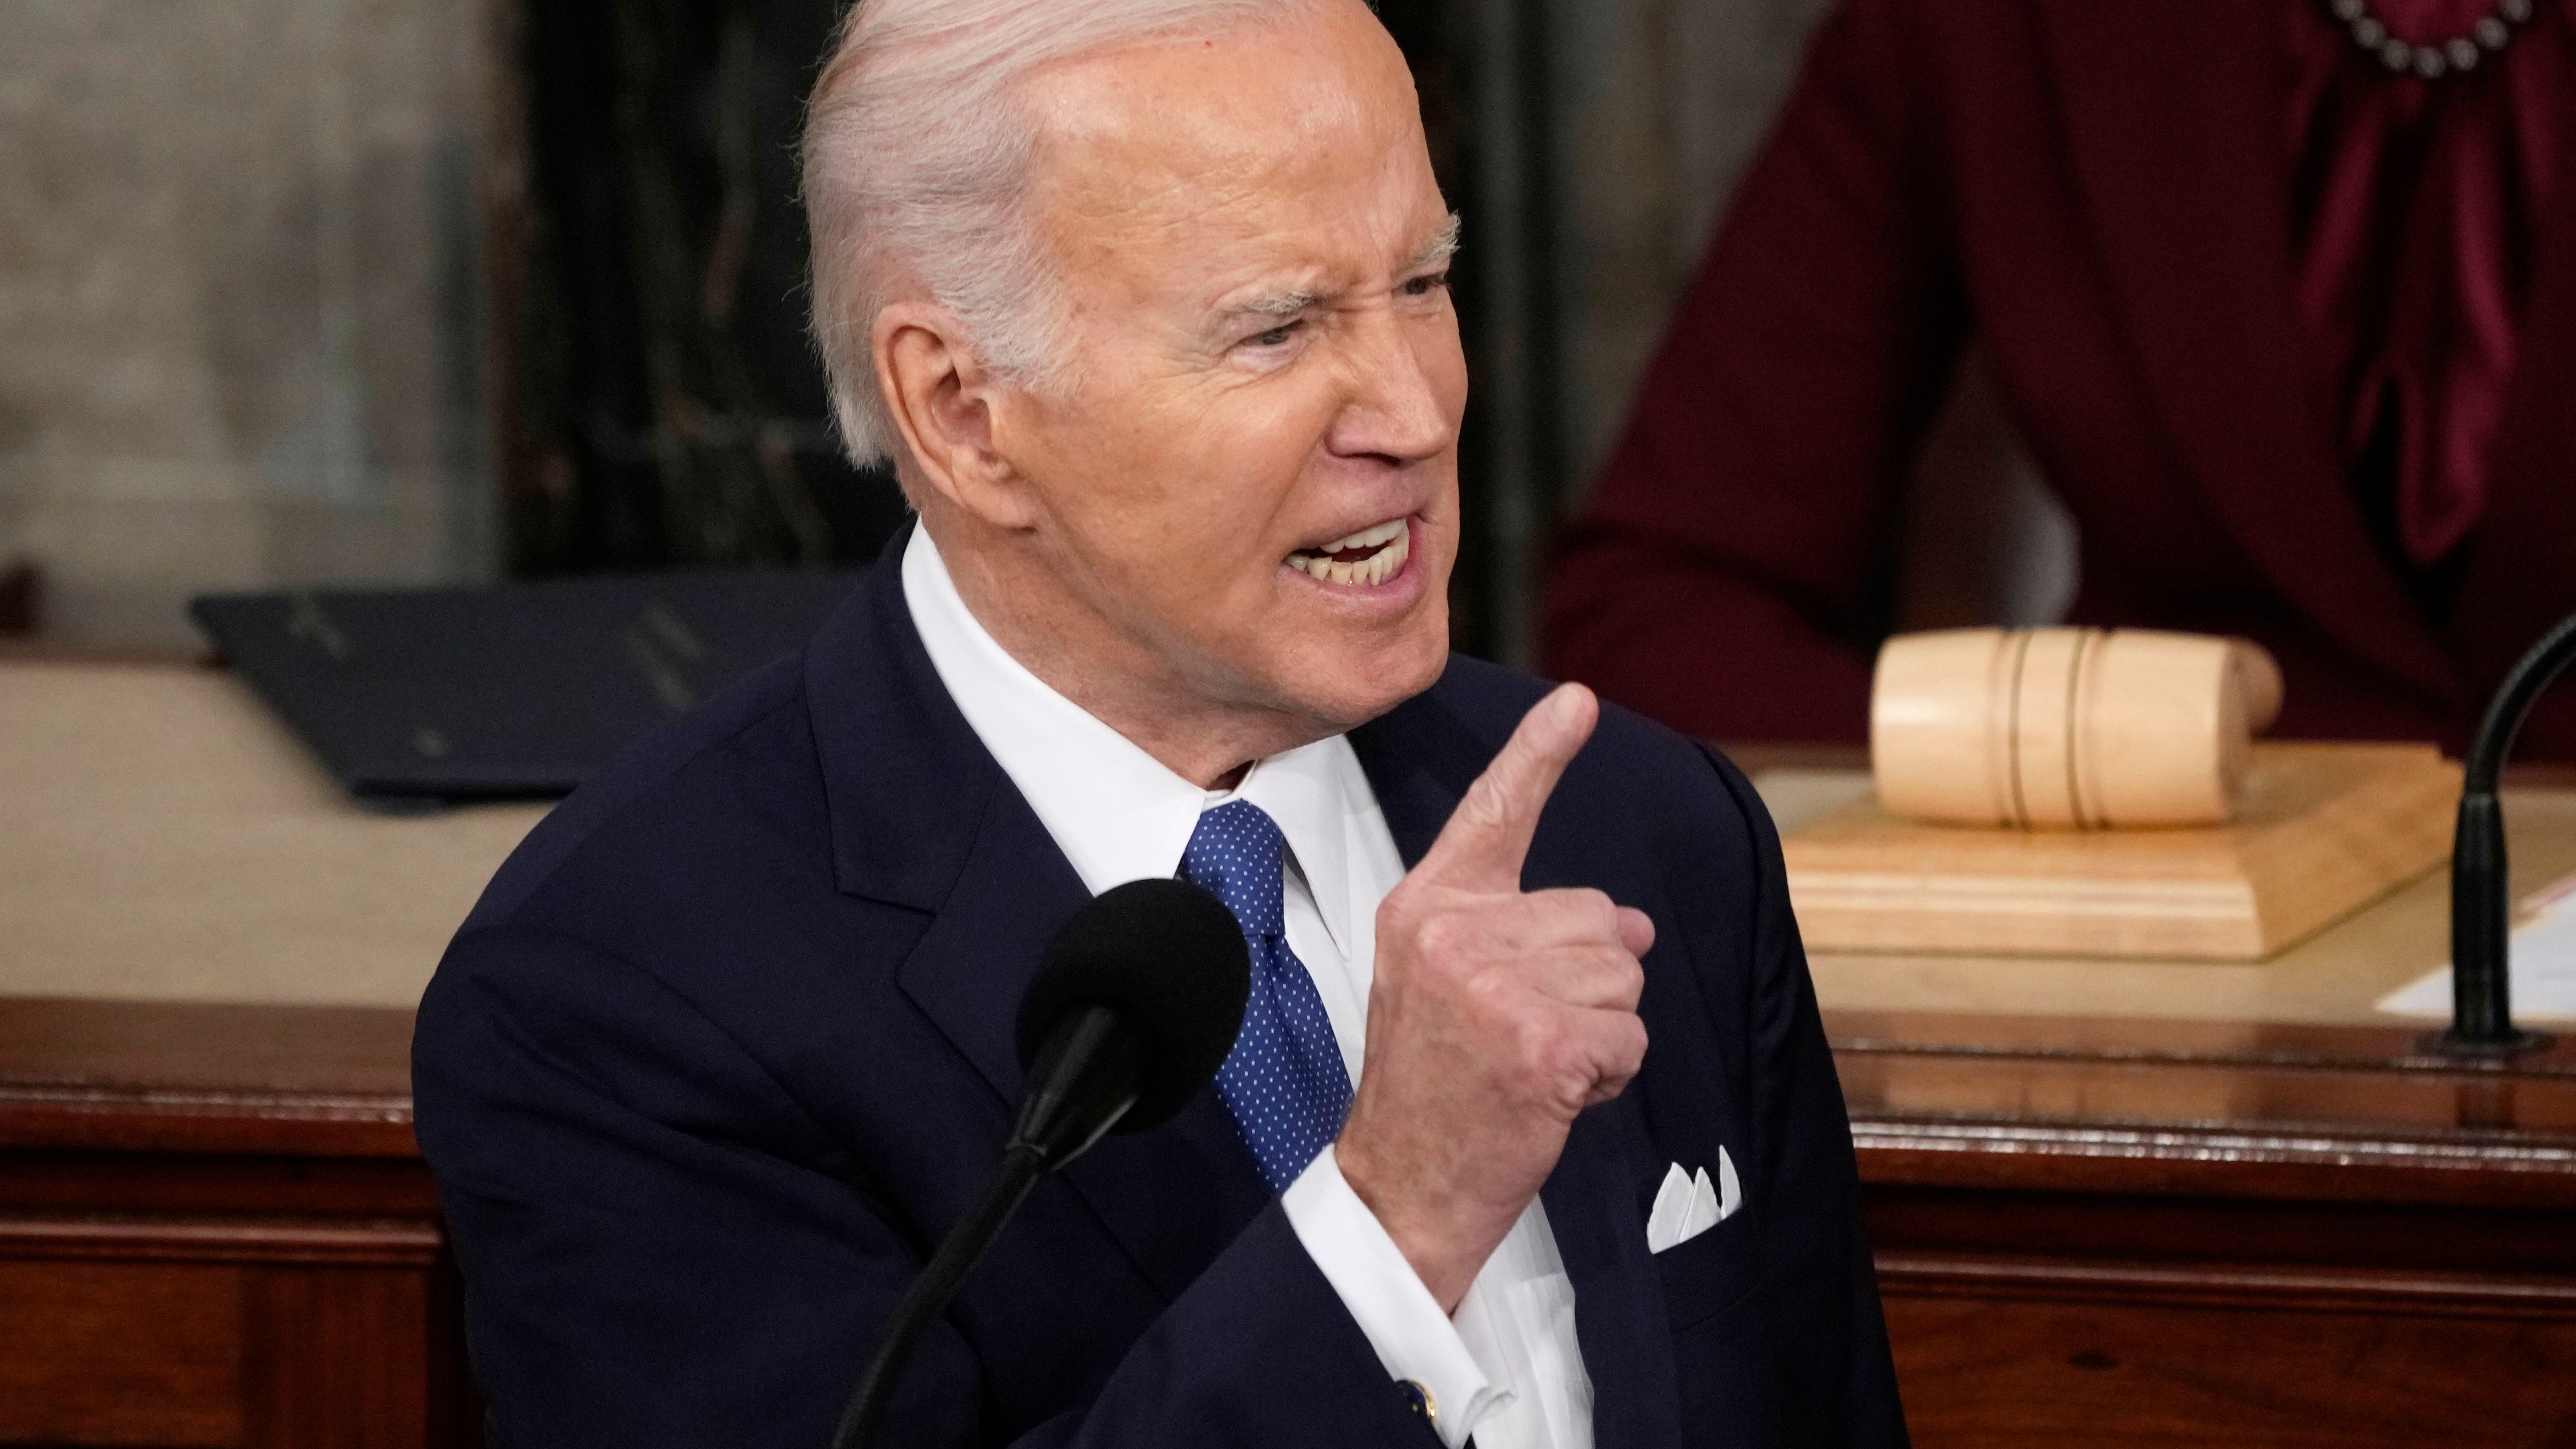 President Joe Biden speaks during the State of the Union address from the House chamber of the United States Capitol in Washington.